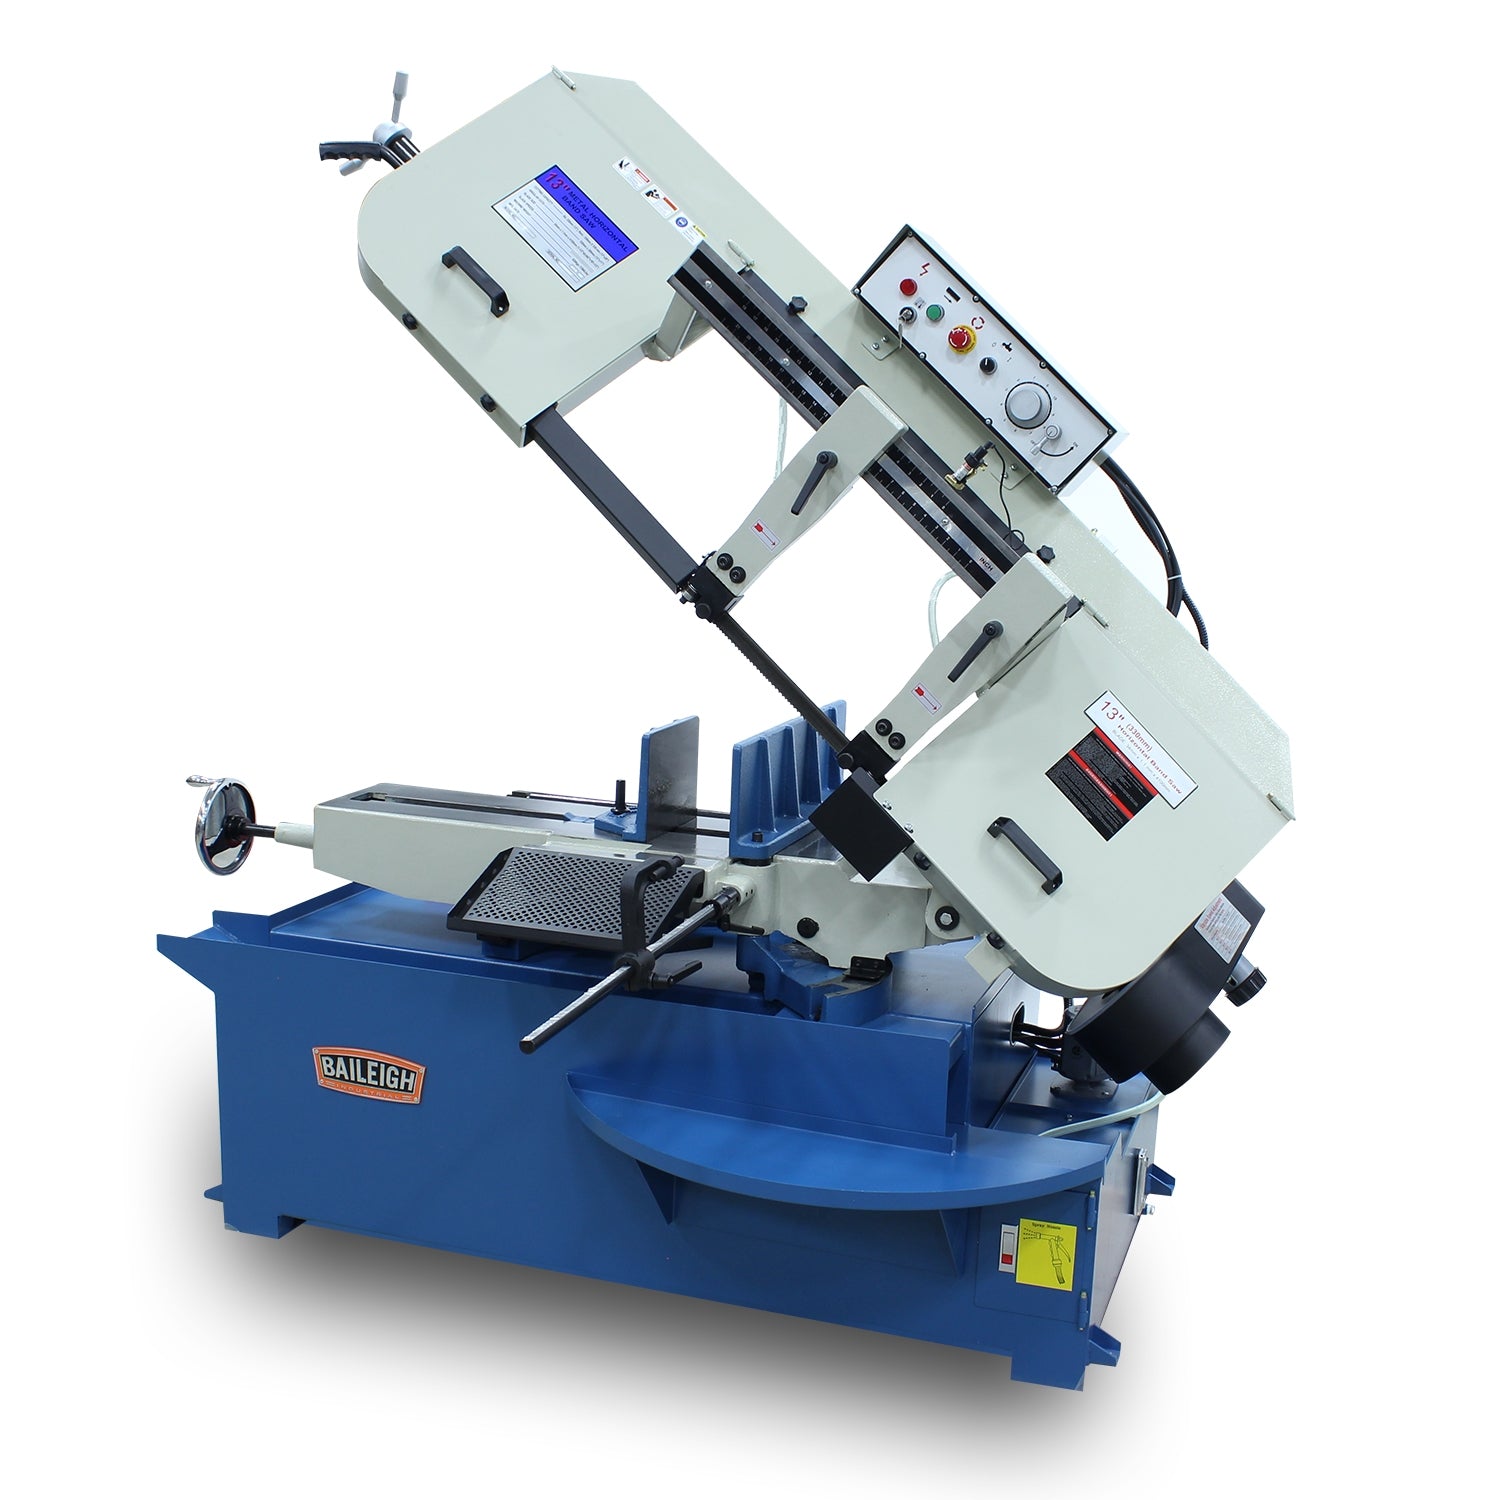 Baileigh BS-330M 220 Volt 3 Phase Metal Cutting Band Saw Mitering Vice and Head 1-1/4" Blade Width